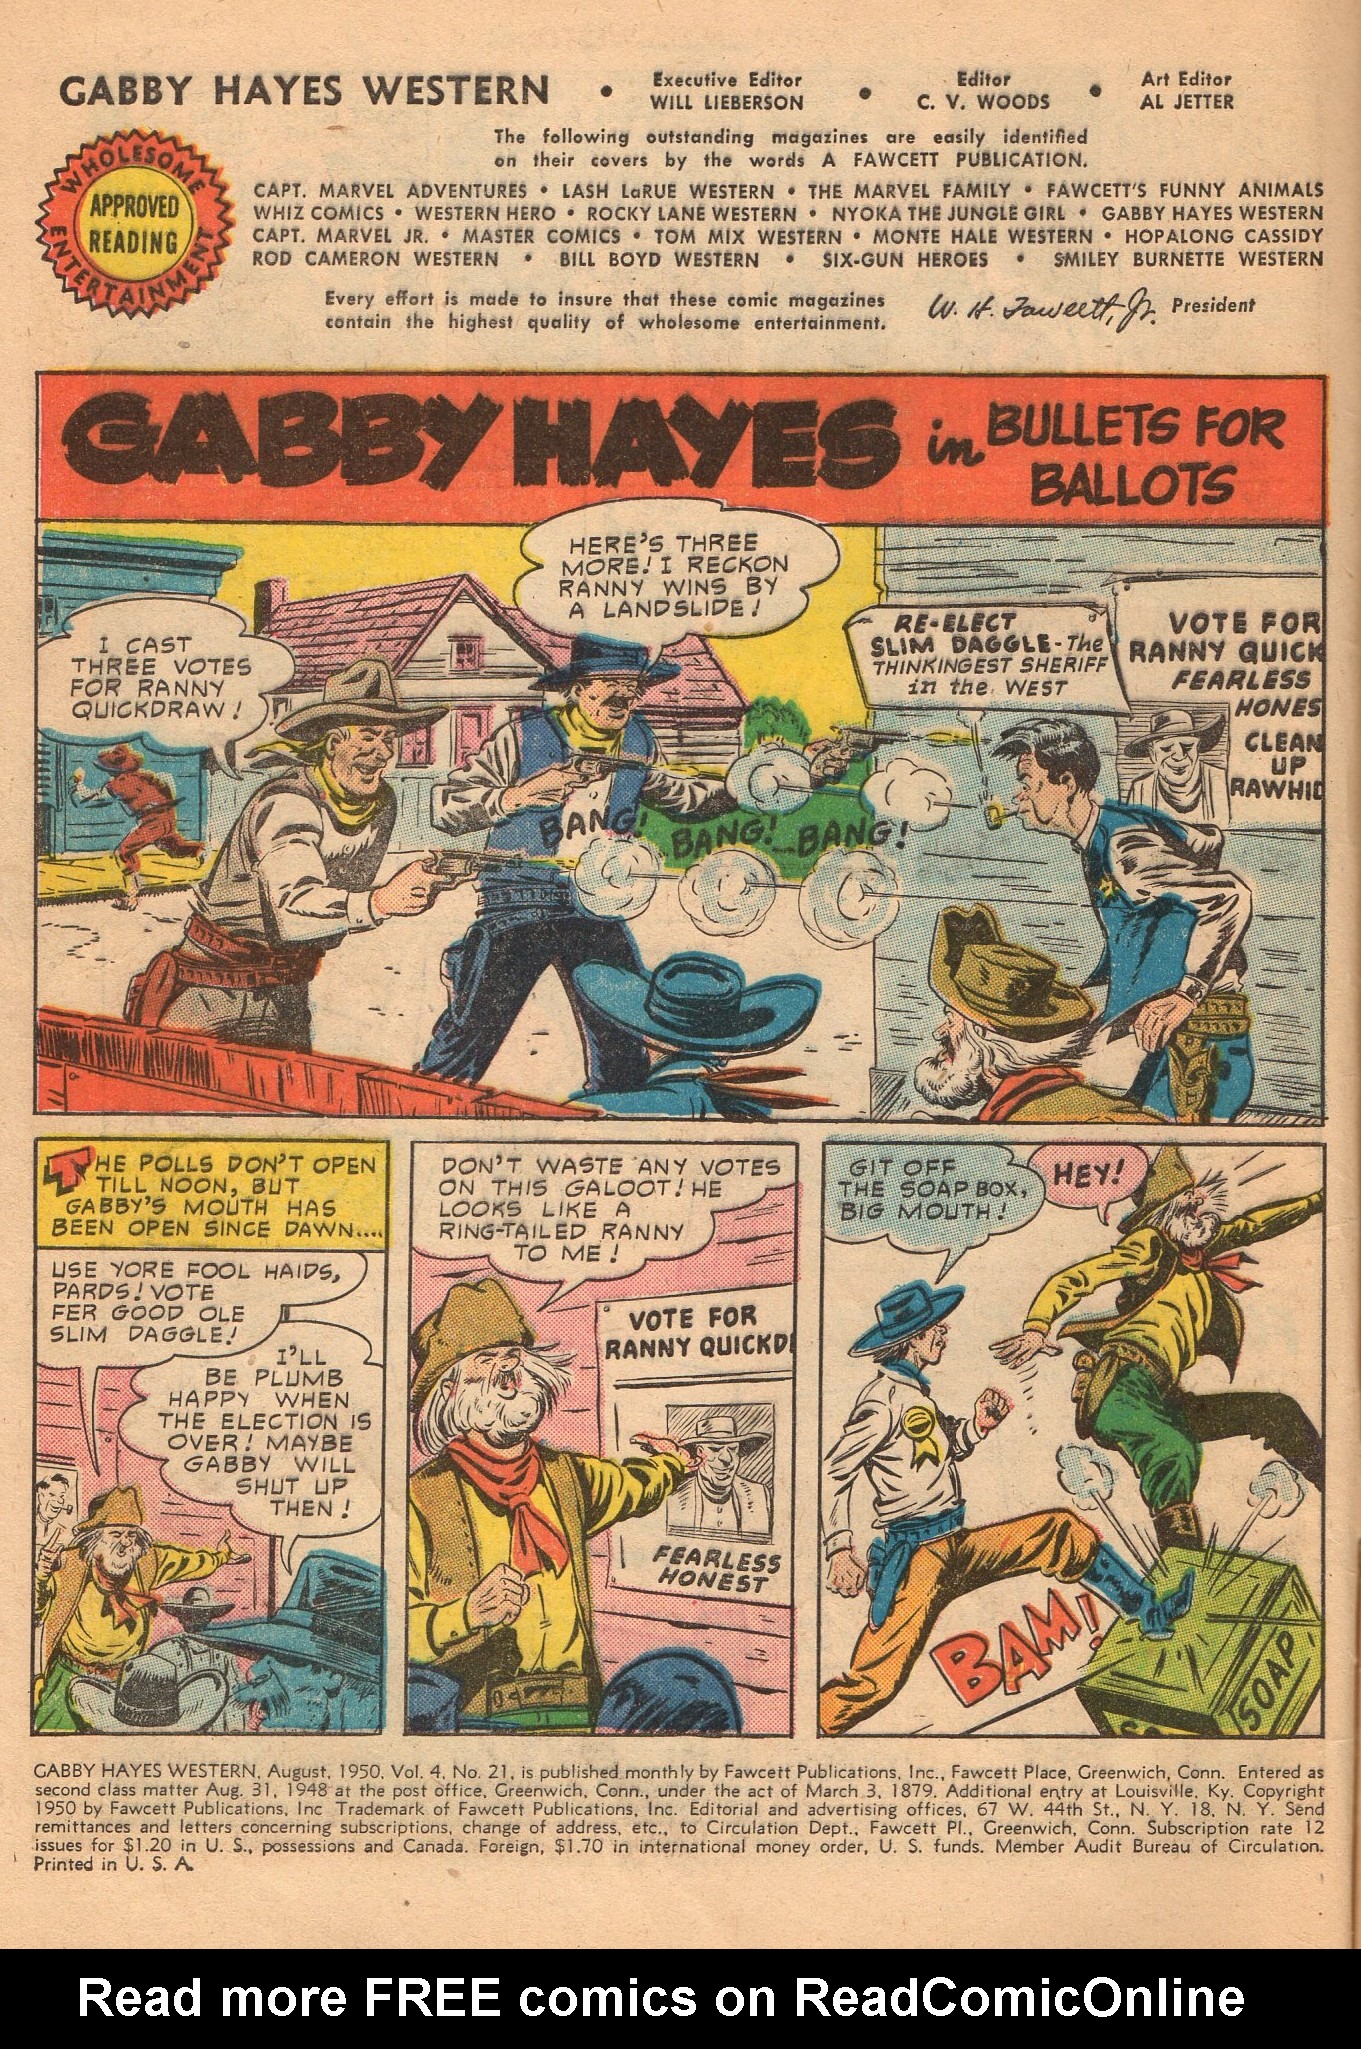 Read online Gabby Hayes Western comic -  Issue #21 - 4